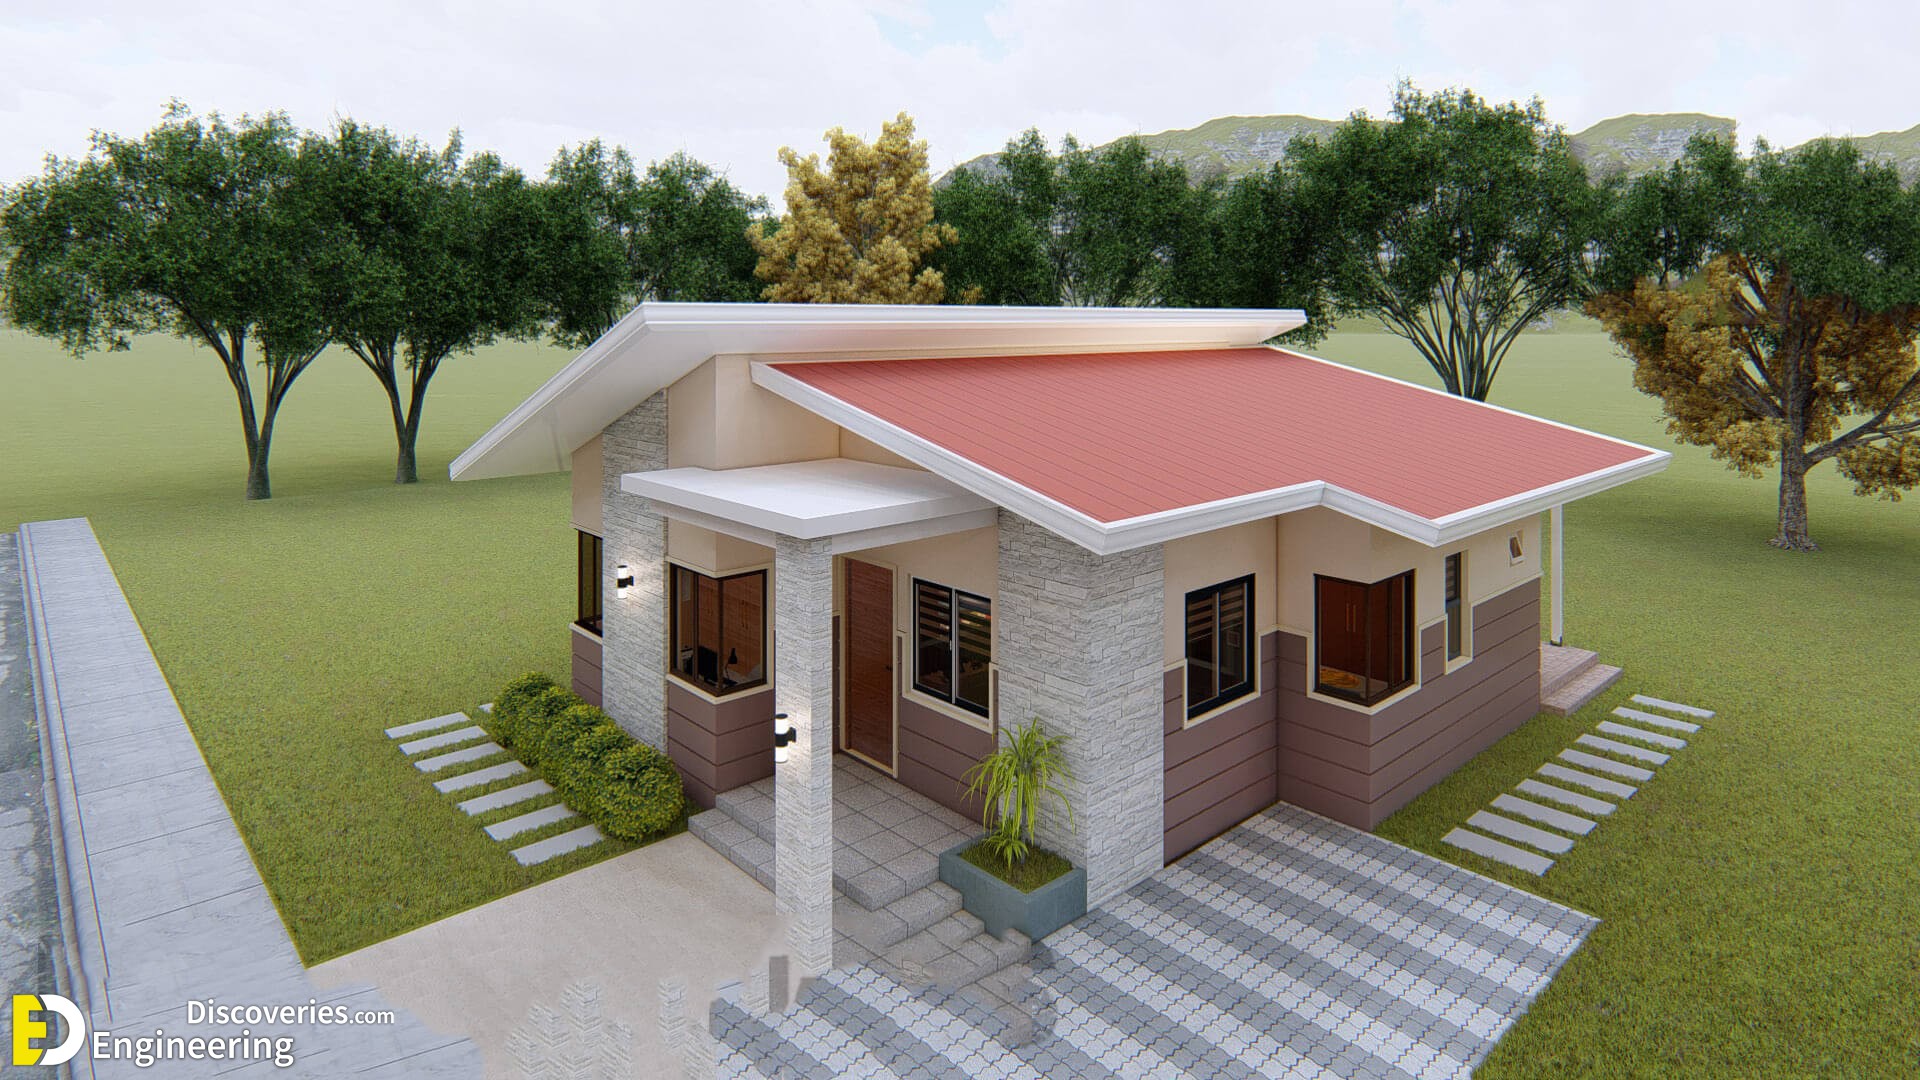 Bungalow House Design 8 9 Meters With 3 Bedroom Engineering Discoveries